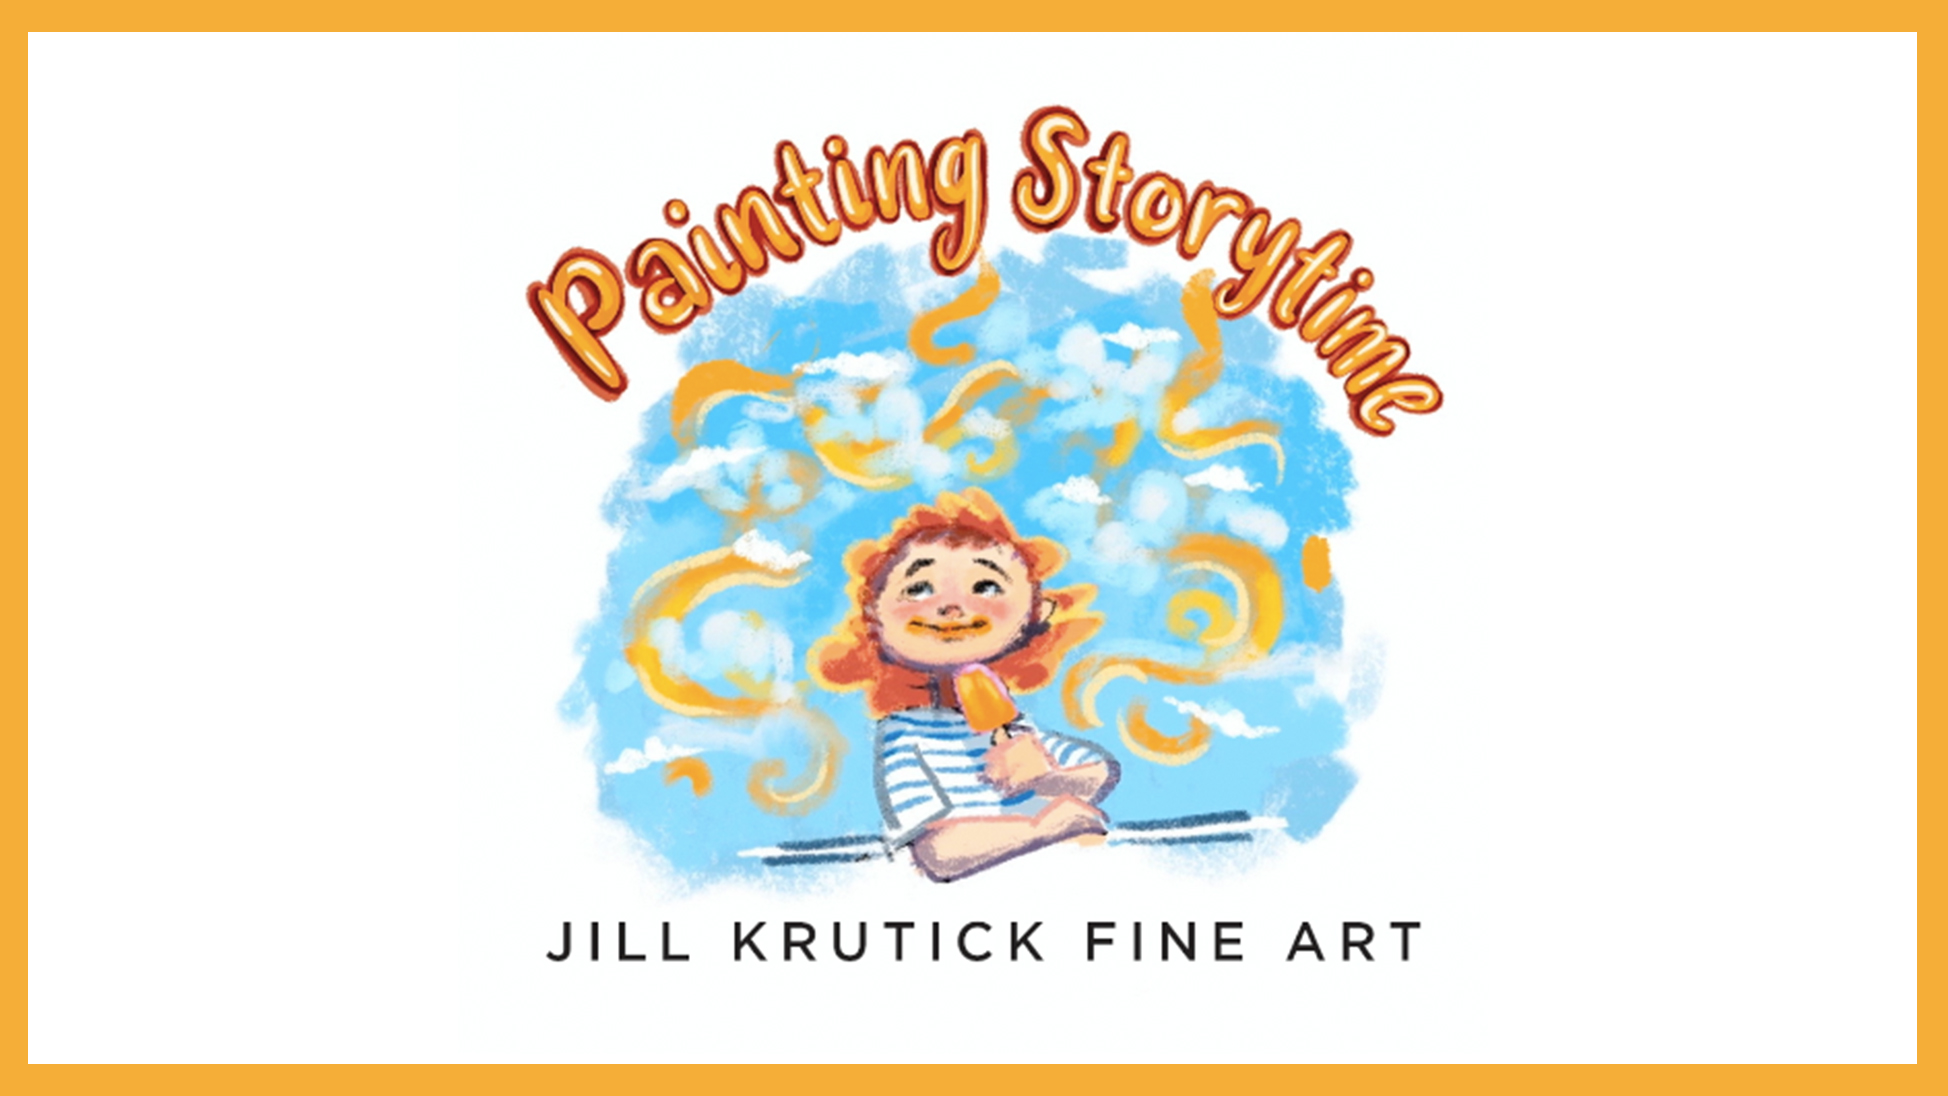 Art Today: Launching "Painting Storytime" -- Jill Krutick Releases Video Series Exploring the Artistry Behind Her Abstract Paintings